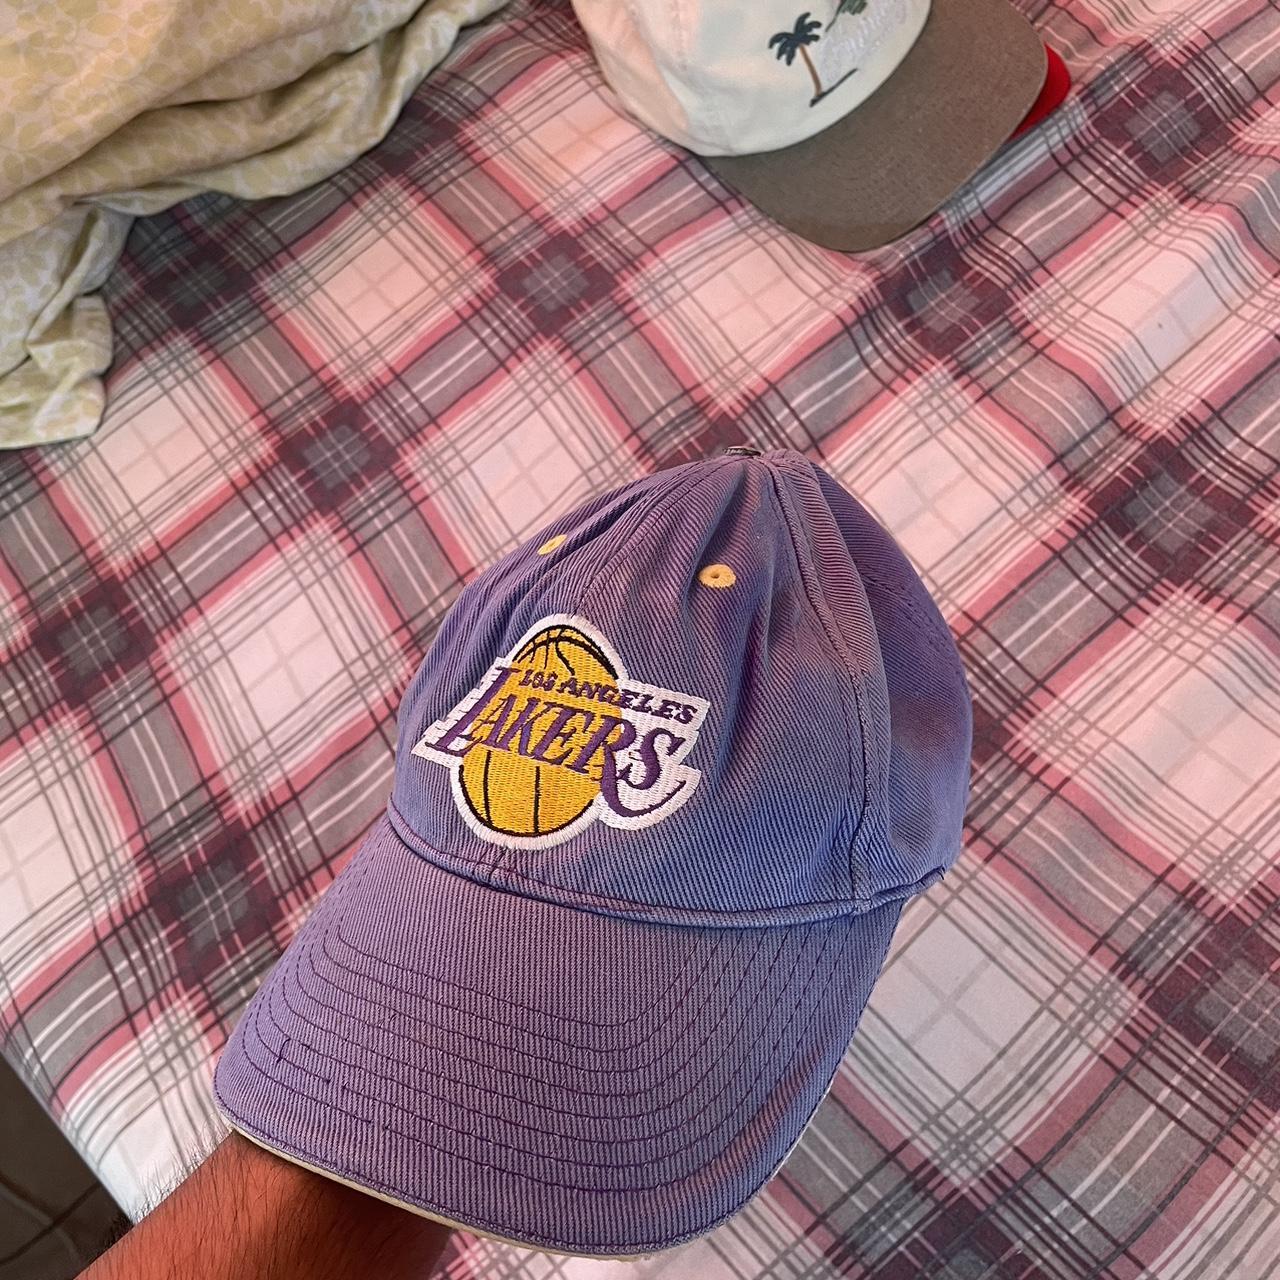 lakers dad hat